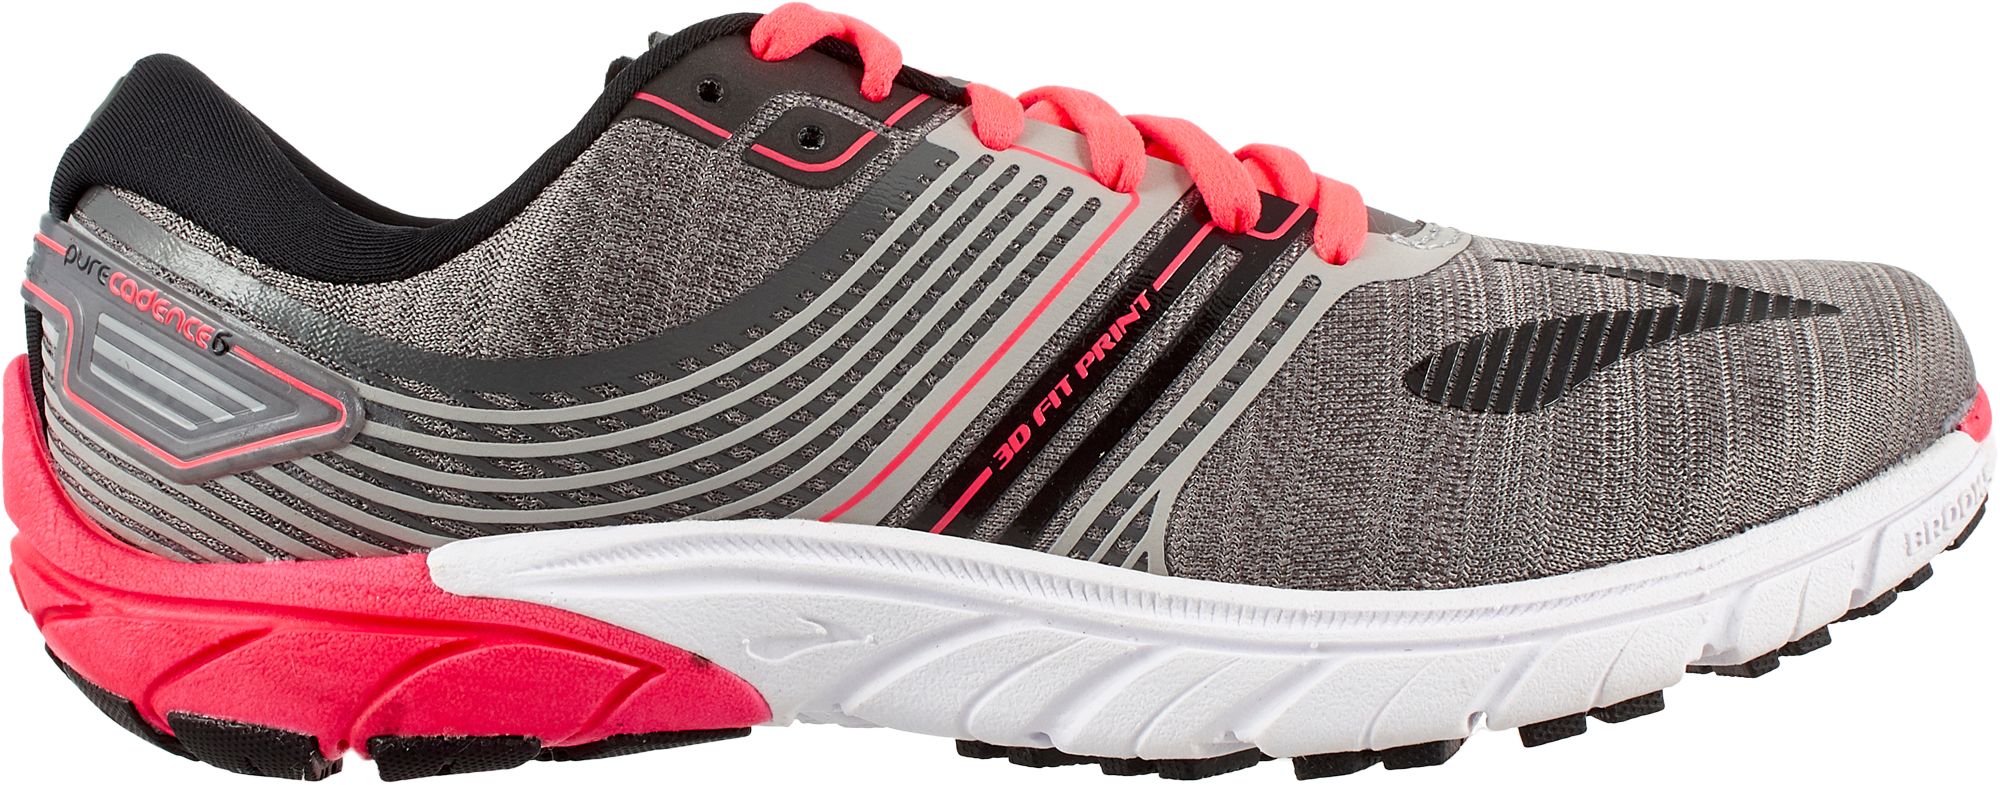 Brooks Shoes & Brooks Running Shoes | Best Price Guarantee at DICK'S